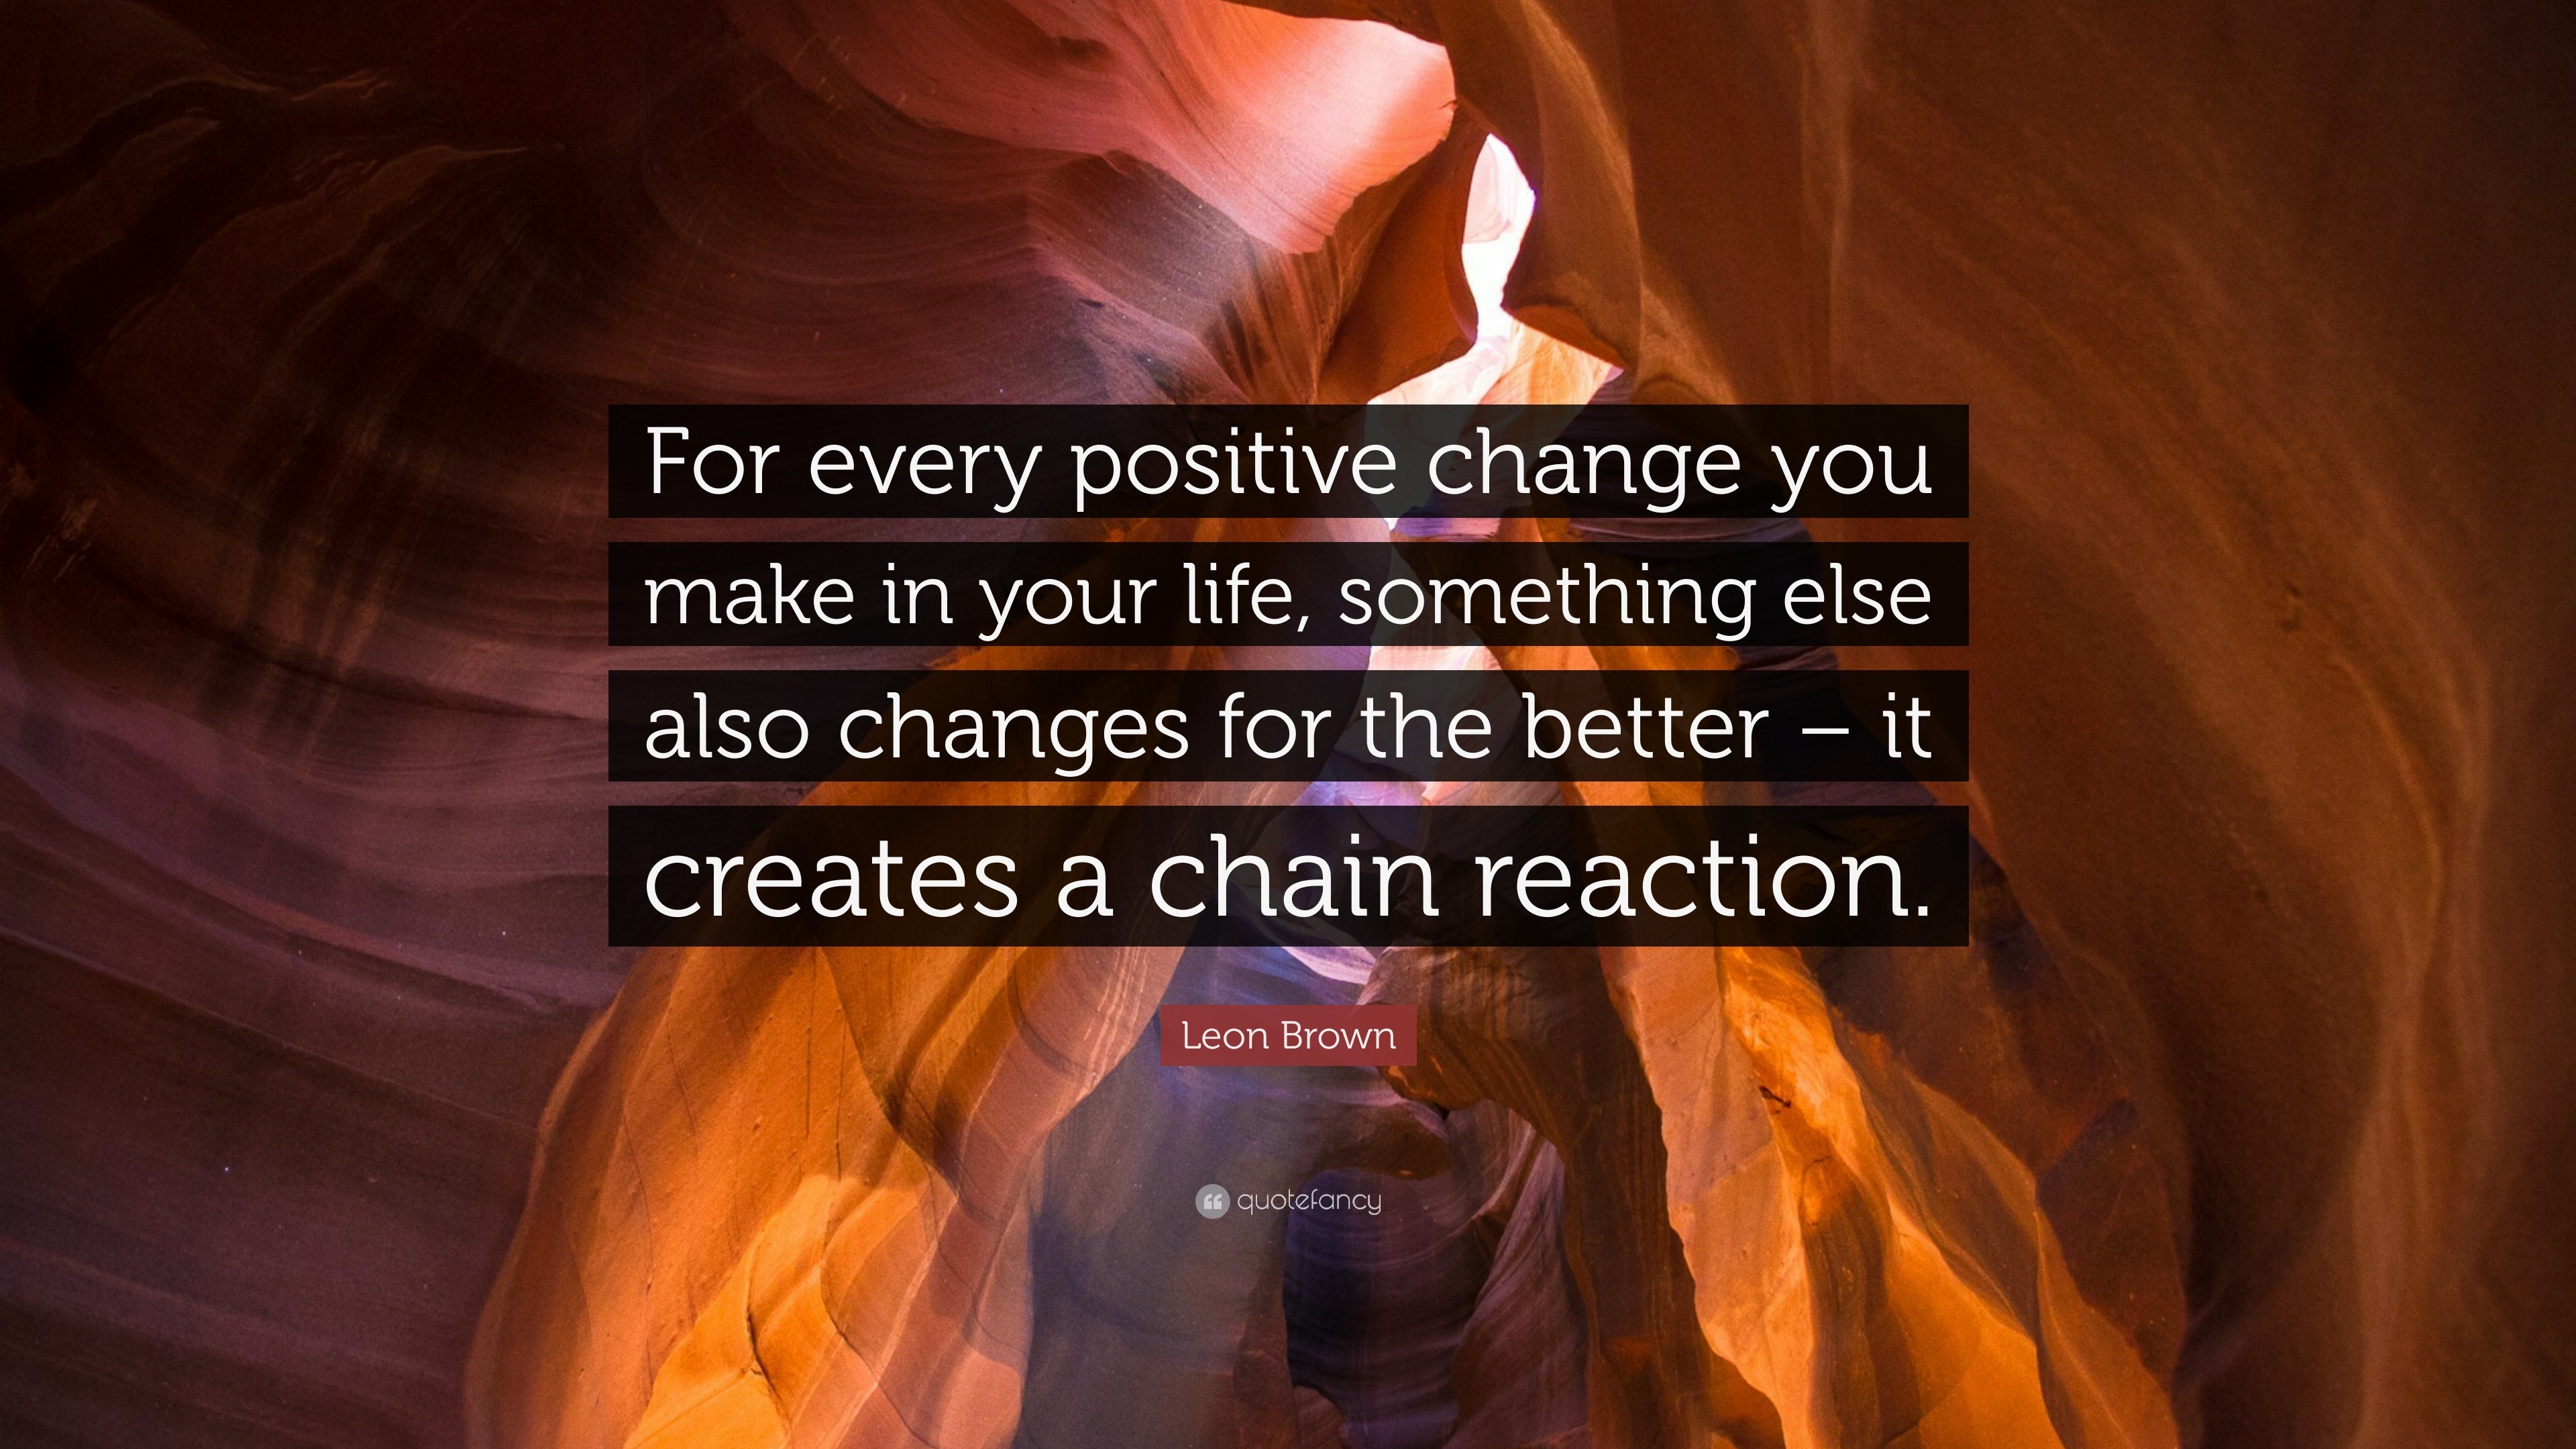 Leon Brown Quote “For every positive change you make in your life something